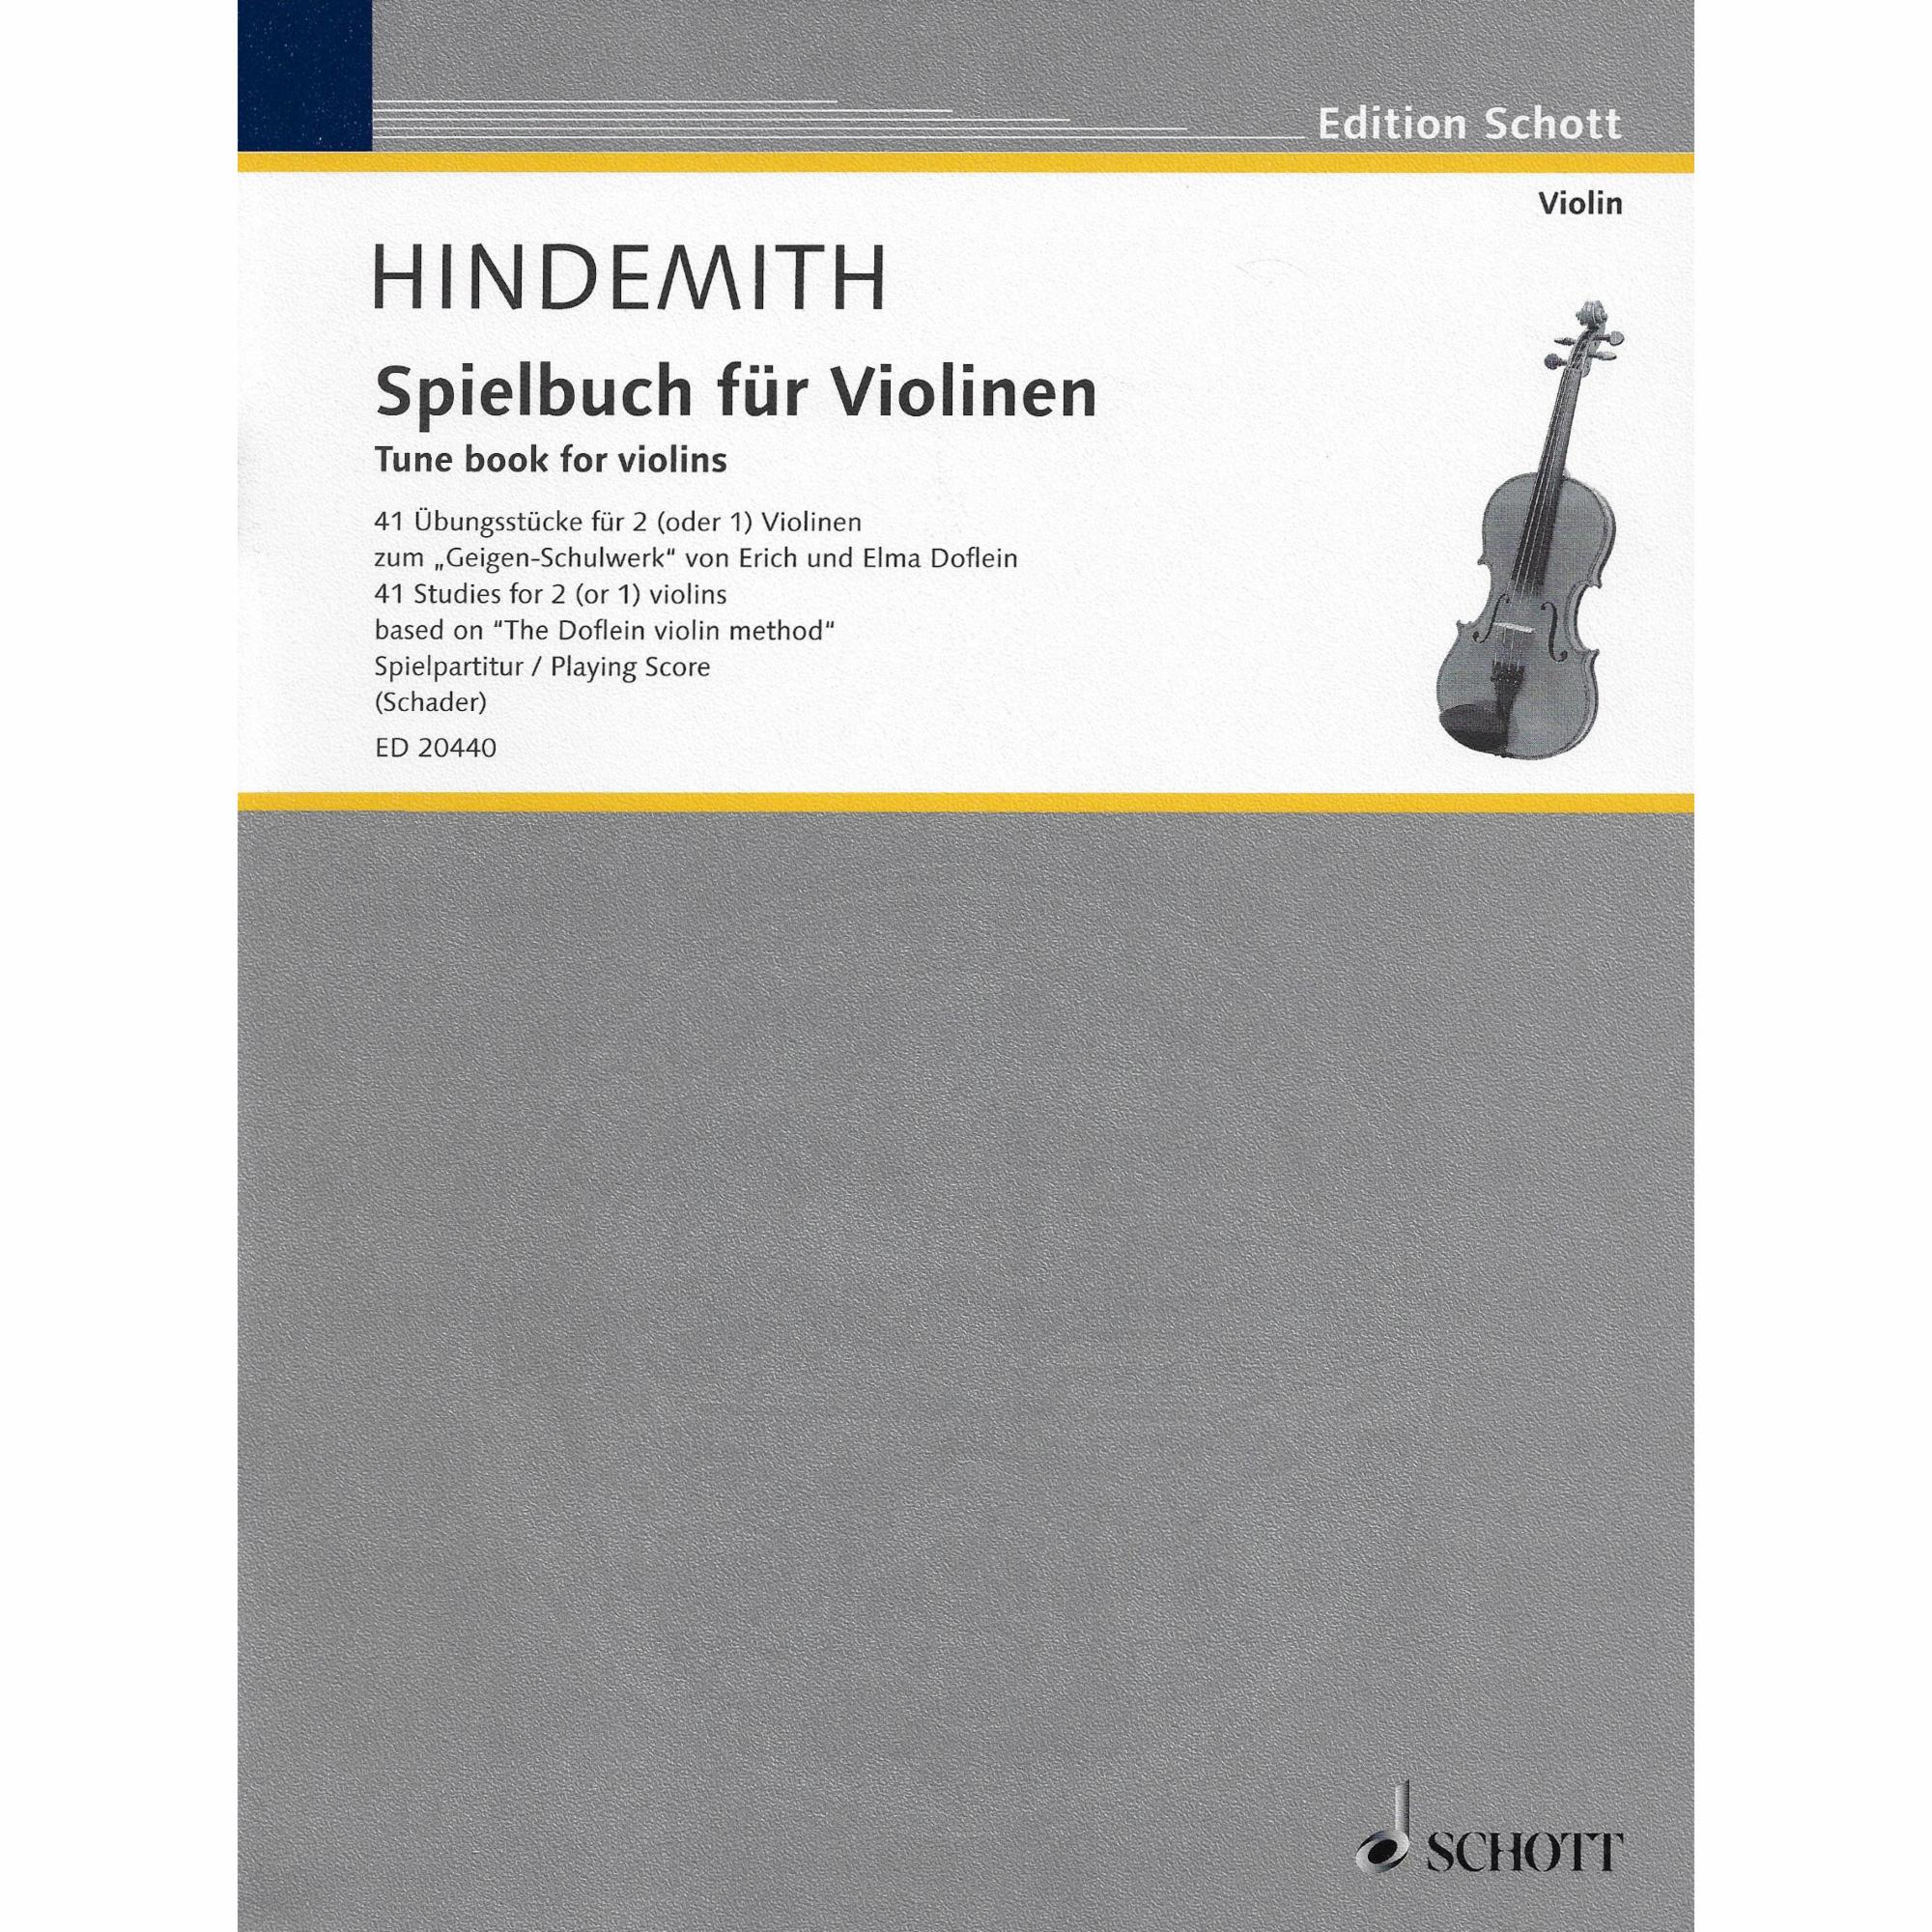 Hindemith -- 41 Studies based on the Doflein Violin Method for Two Violins